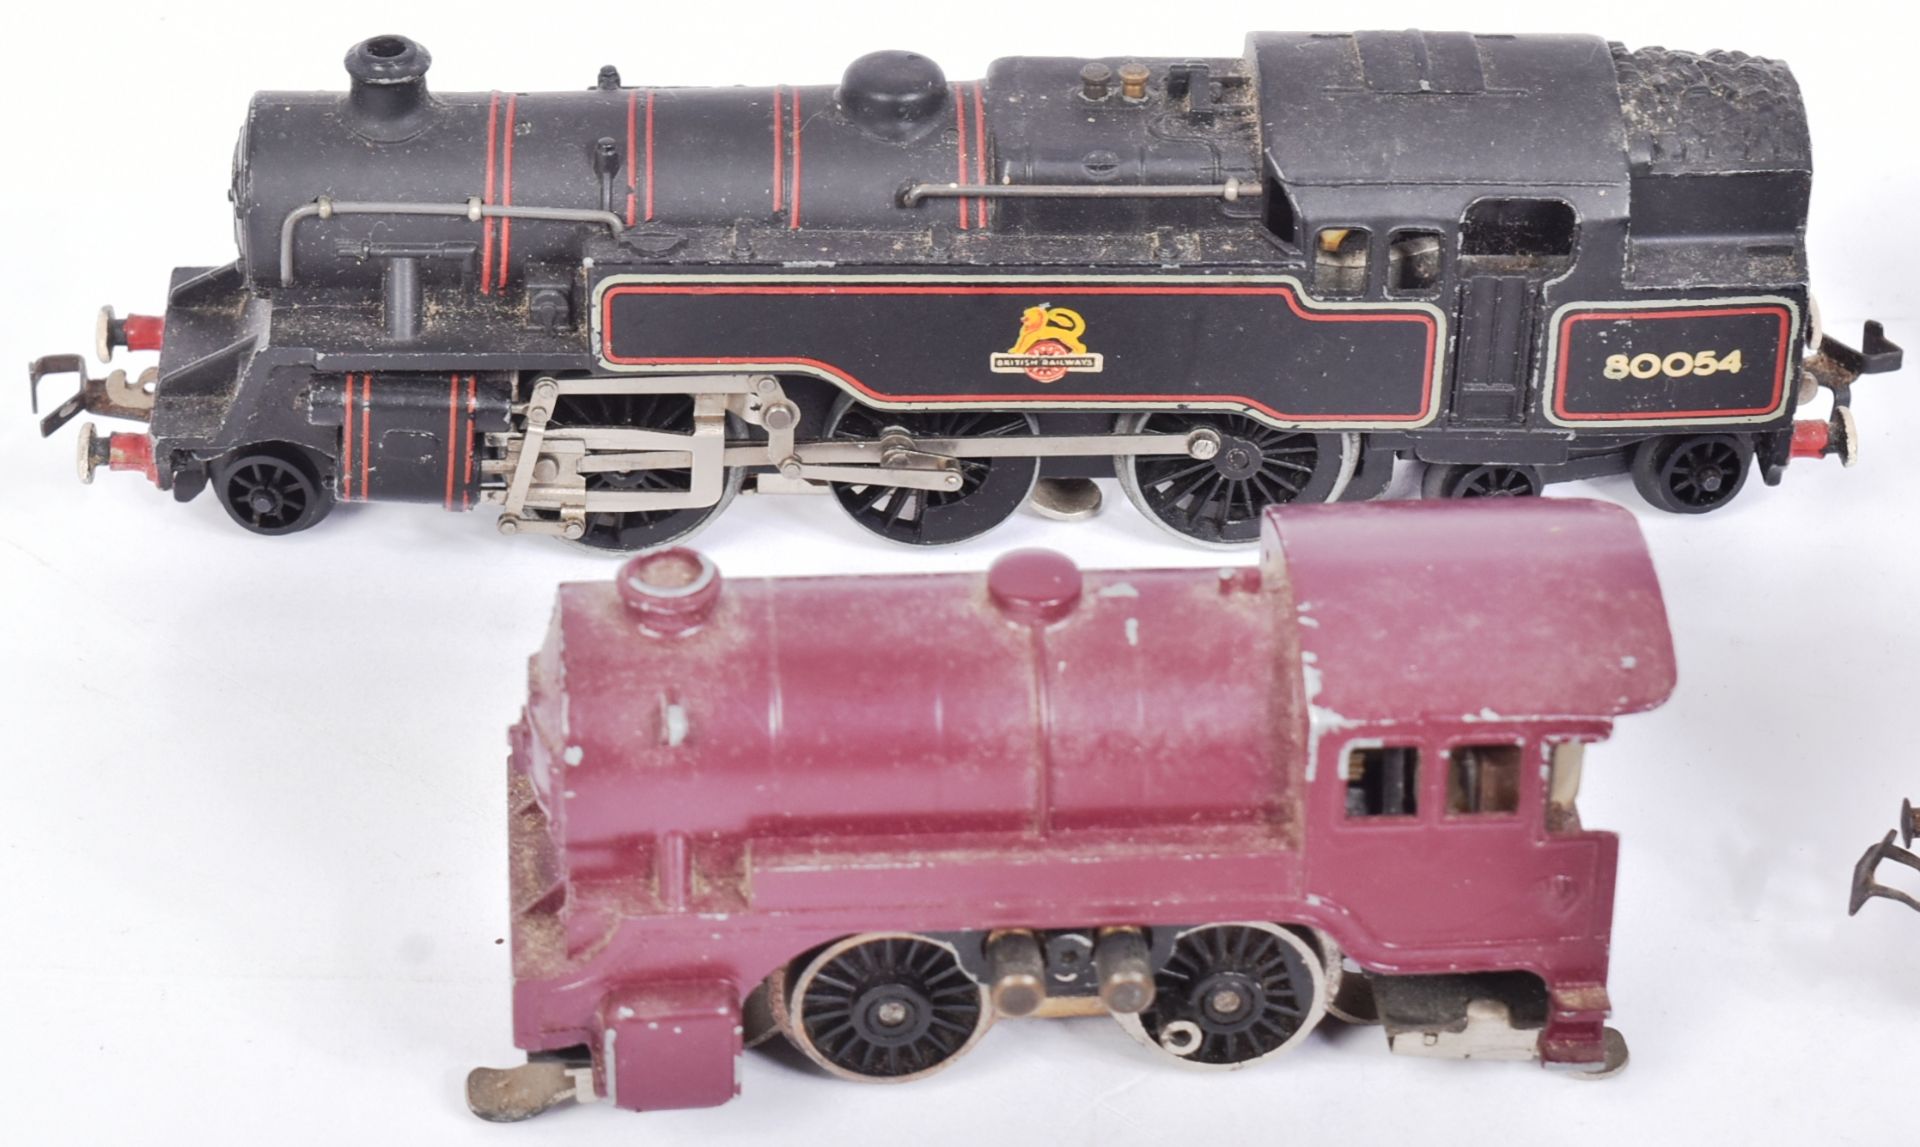 COLLECTION OF ASSORTED HORNBY AND OTHER MAKERS OO GAUGE MODEL RAILWAY LOCOMOTIVE ENGINES - Image 4 of 6